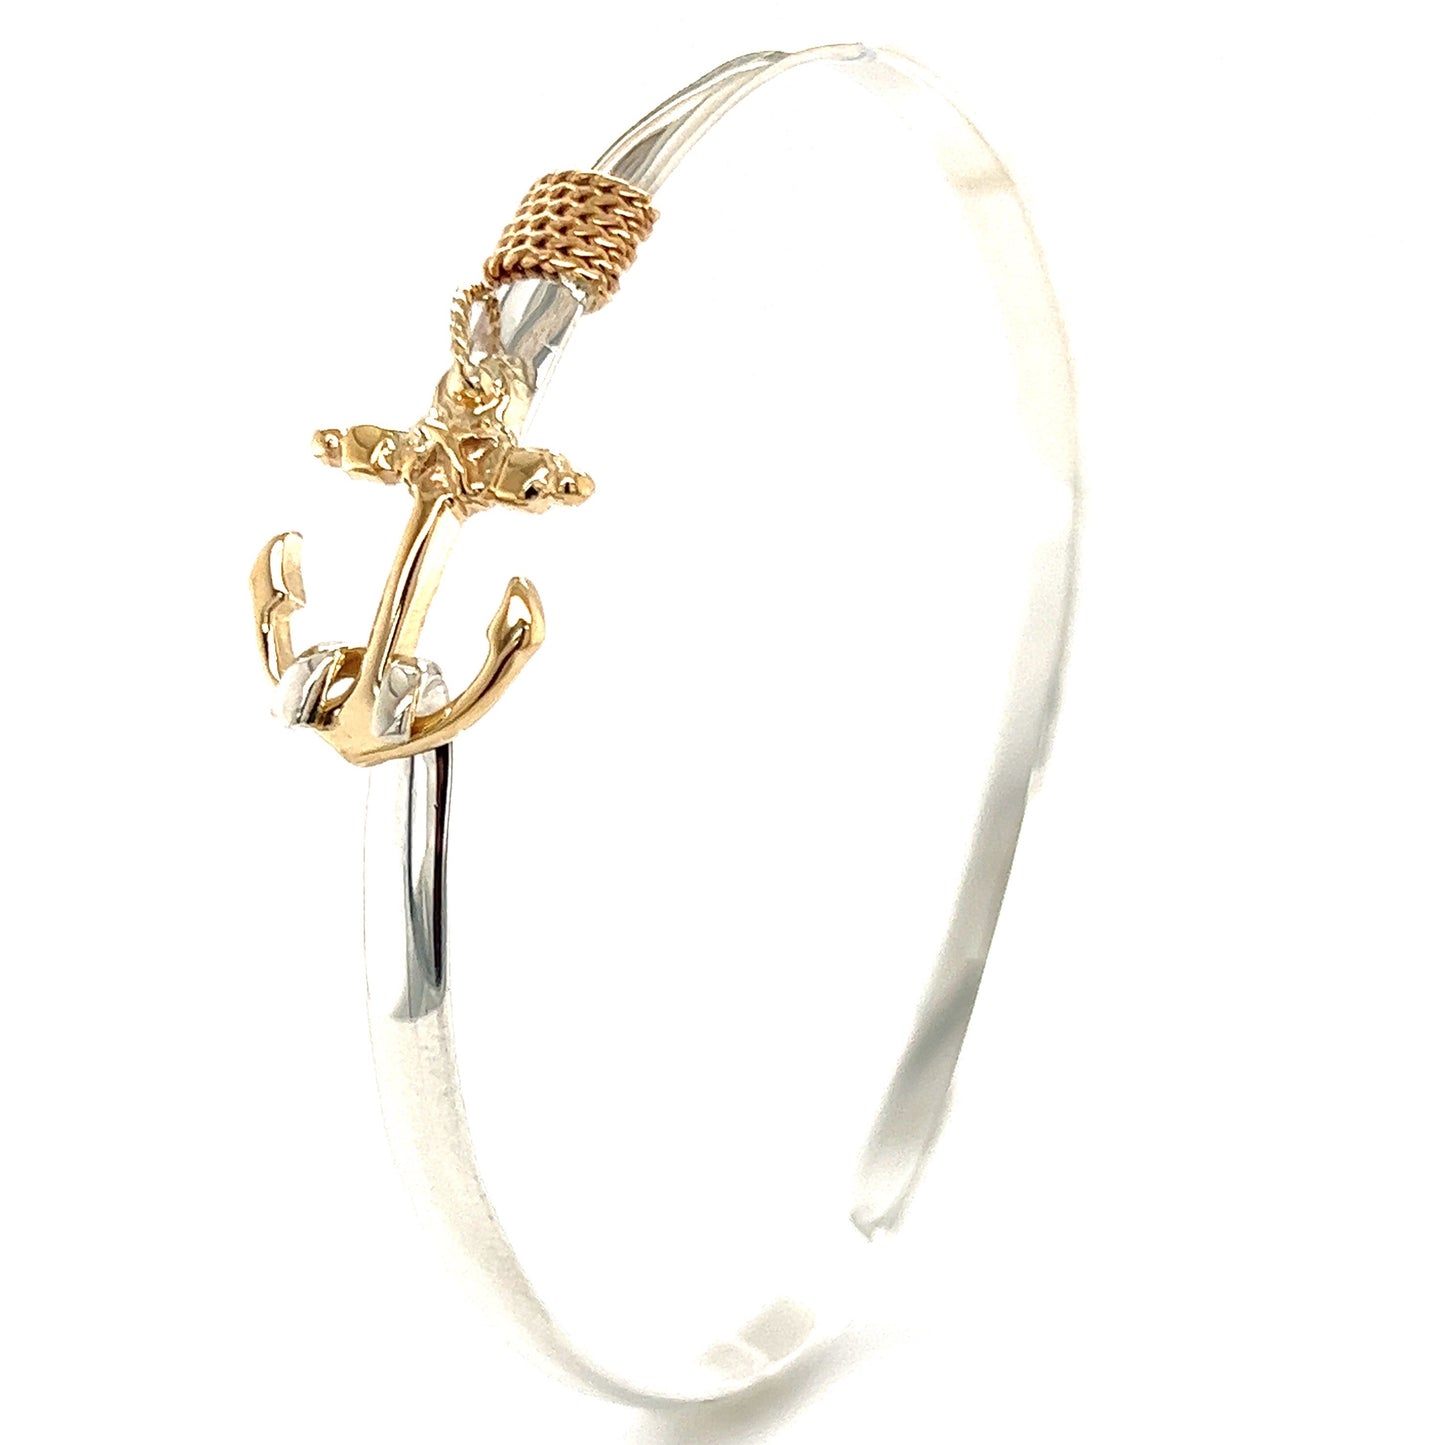 Flat 4mm Bangle Bracelet with 14K Yellow Gold Anchor and Wrap in Sterling Silver Left Side View